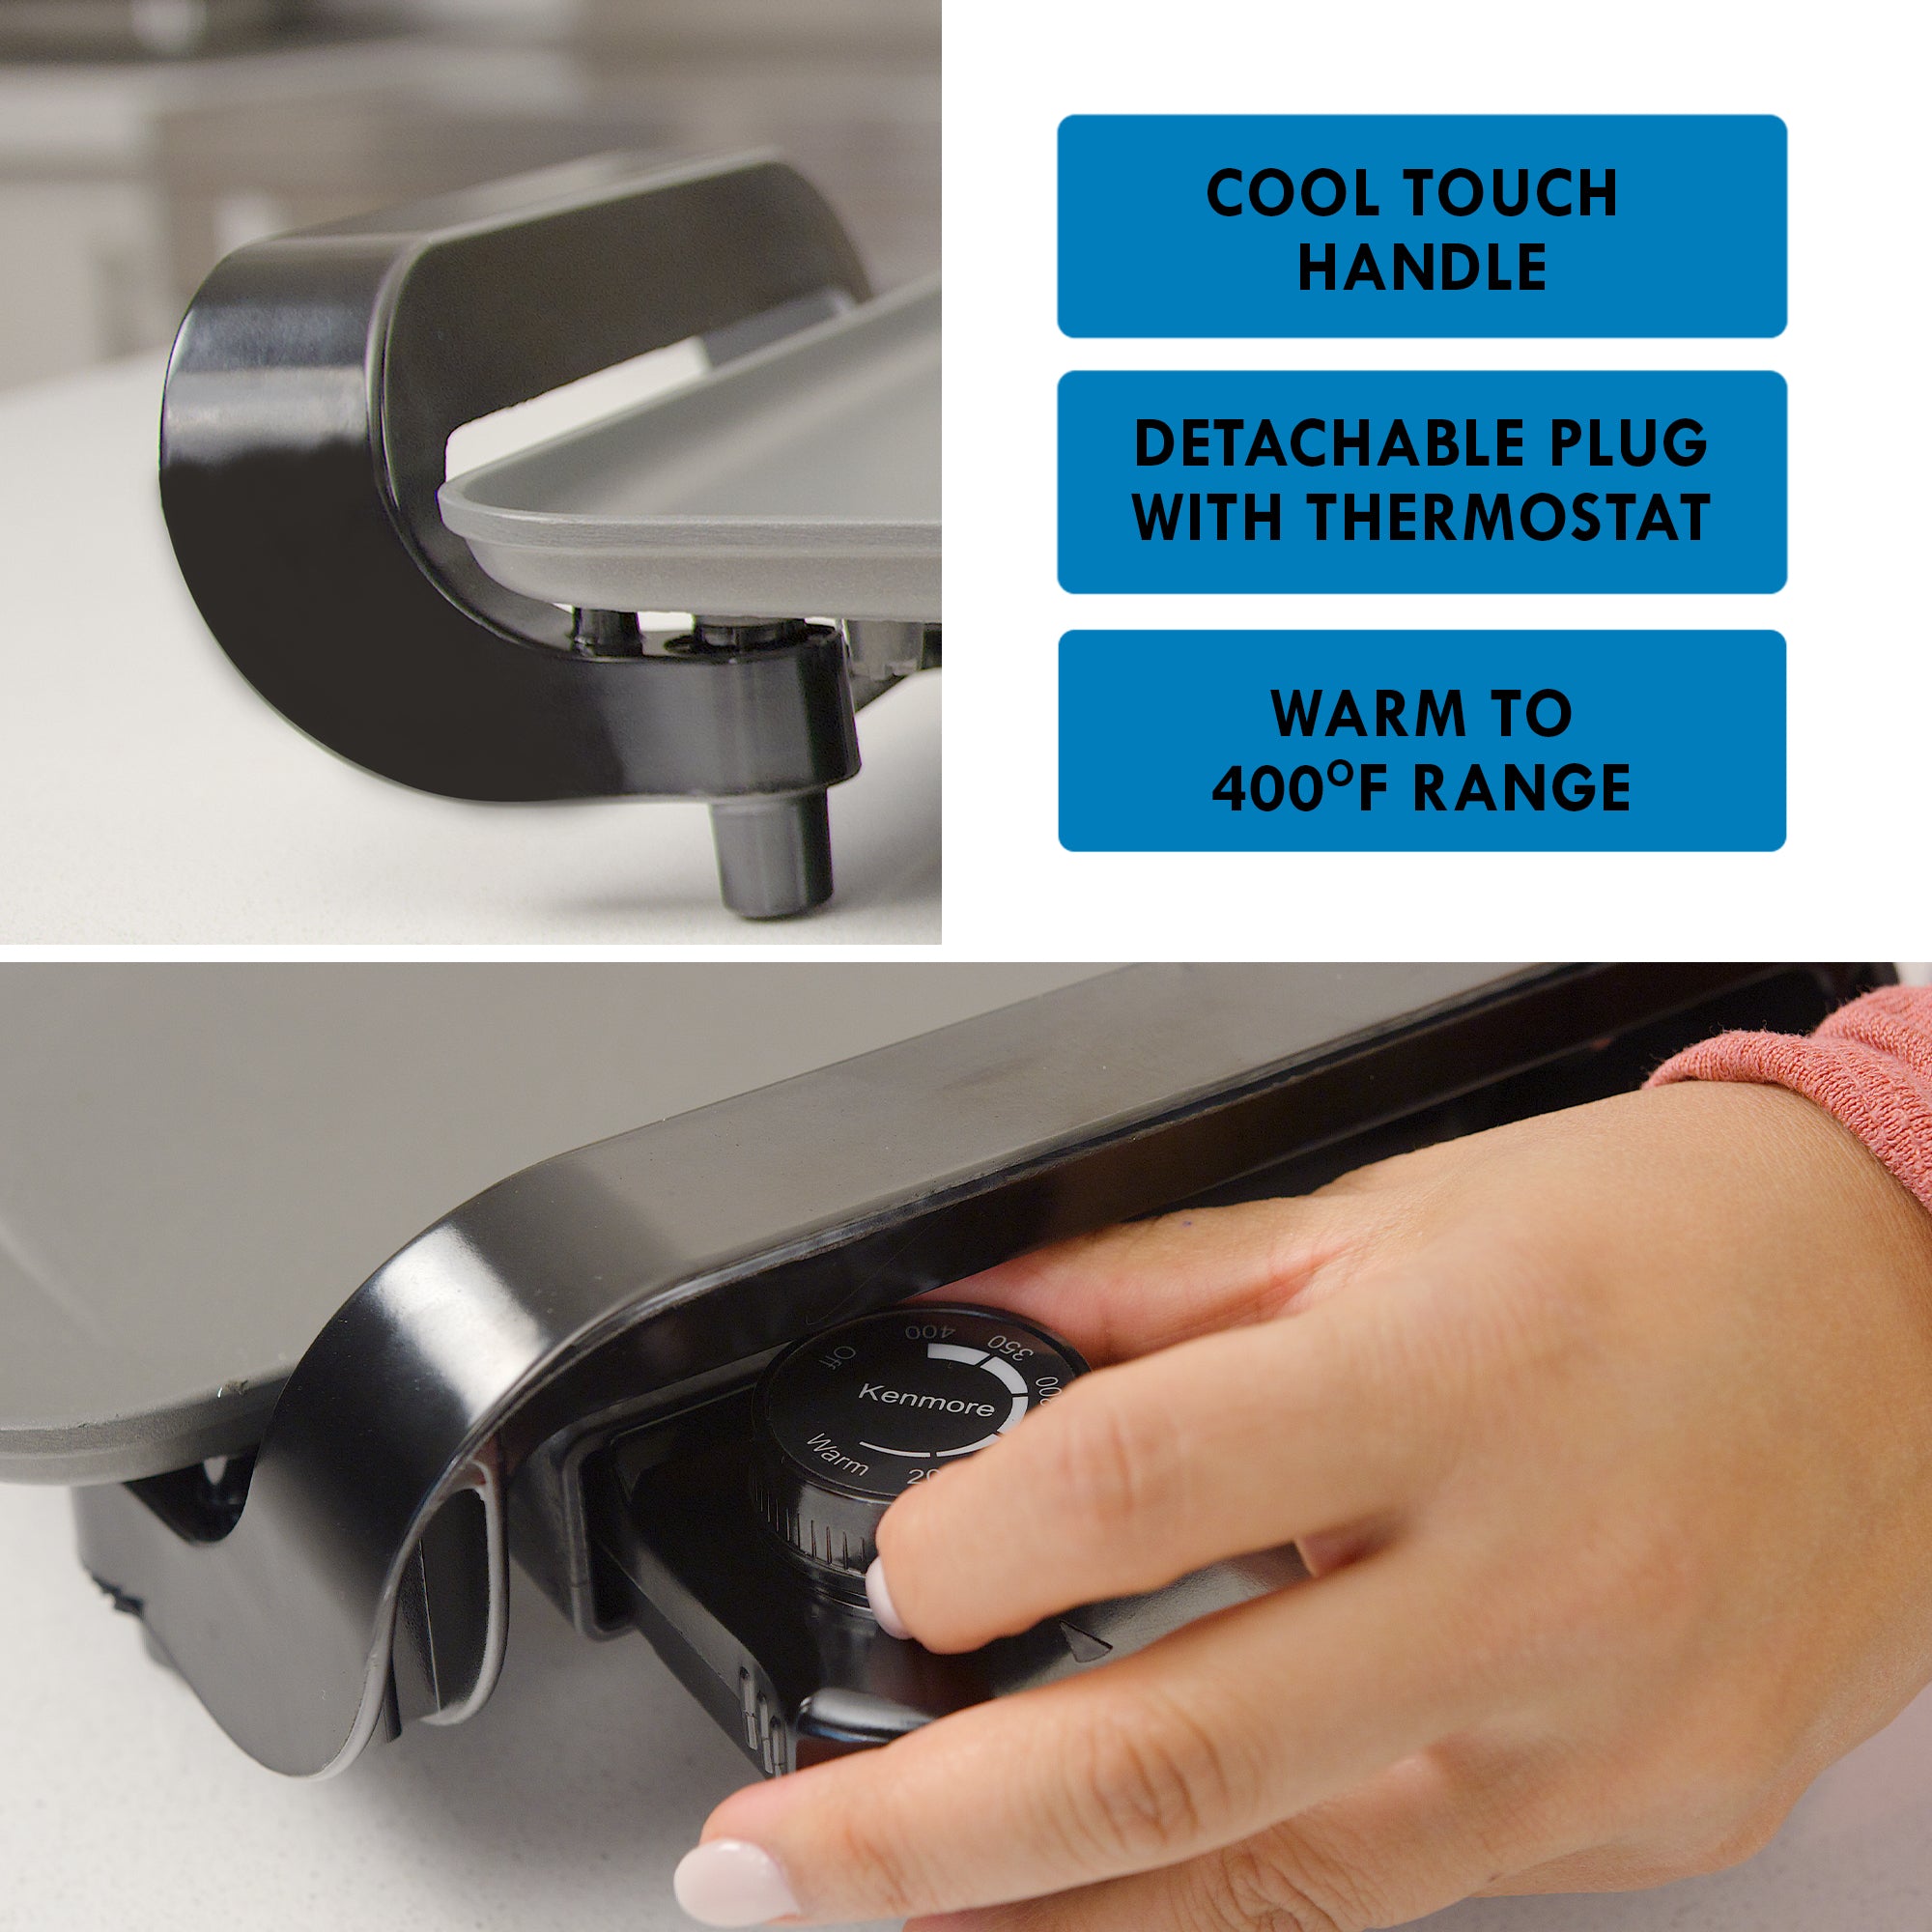 Two closeup images show the handle (top) and person's hand turning the temperature dial on the Kenmore non-stick electric griddle (bottom) with features listed to the right: cool touch handle; detachable plug with thermostat; warm to 400°F range 